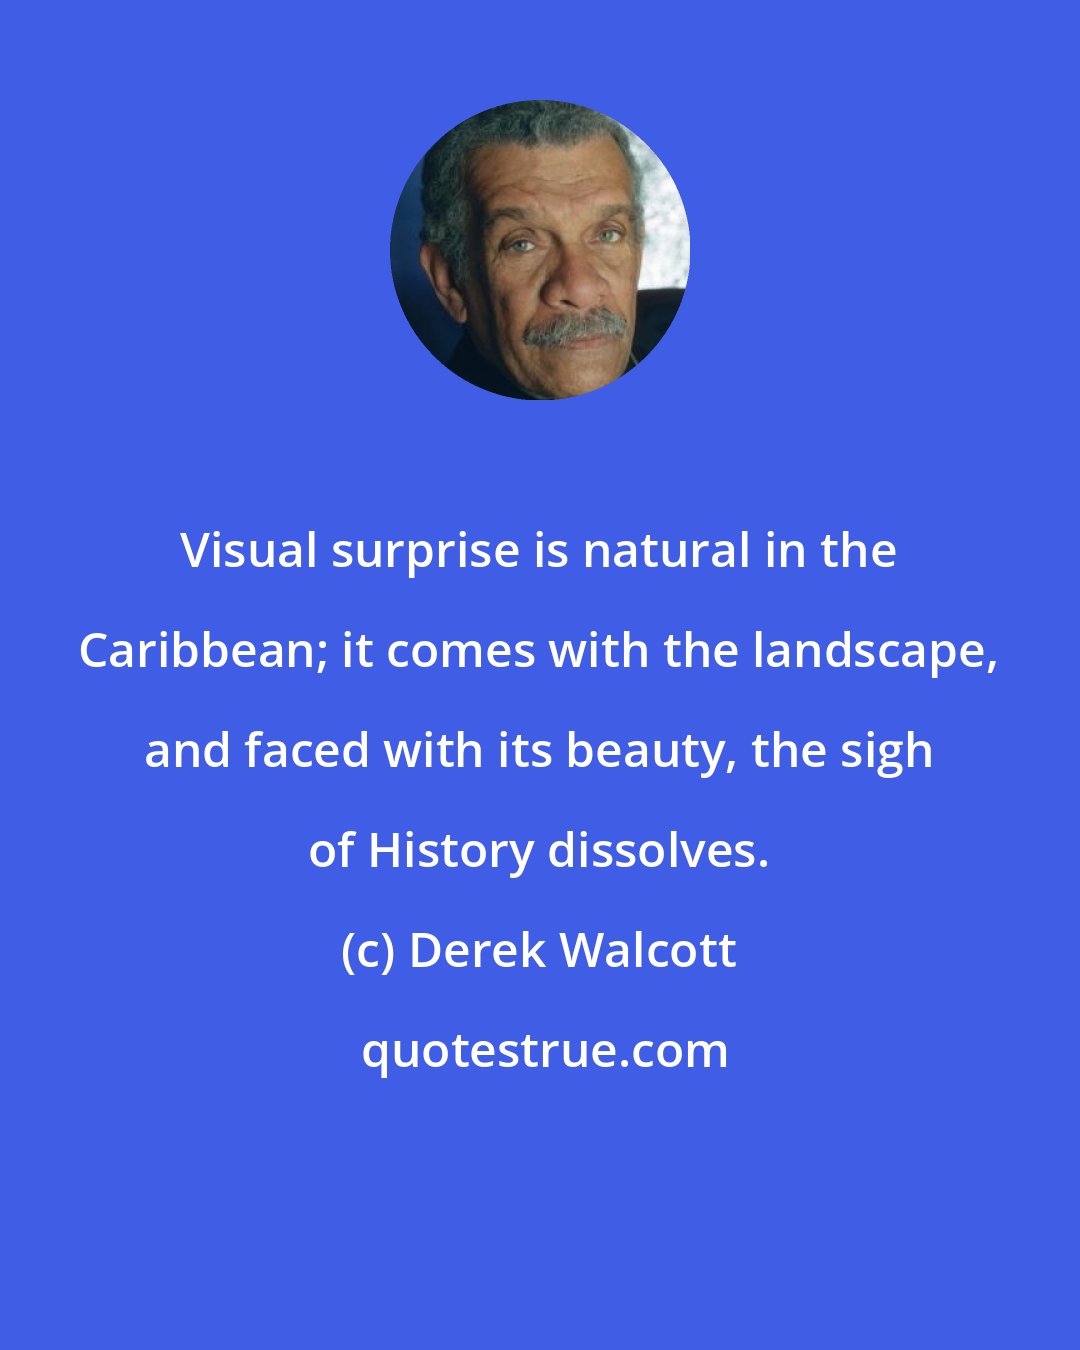 Derek Walcott: Visual surprise is natural in the Caribbean; it comes with the landscape, and faced with its beauty, the sigh of History dissolves.